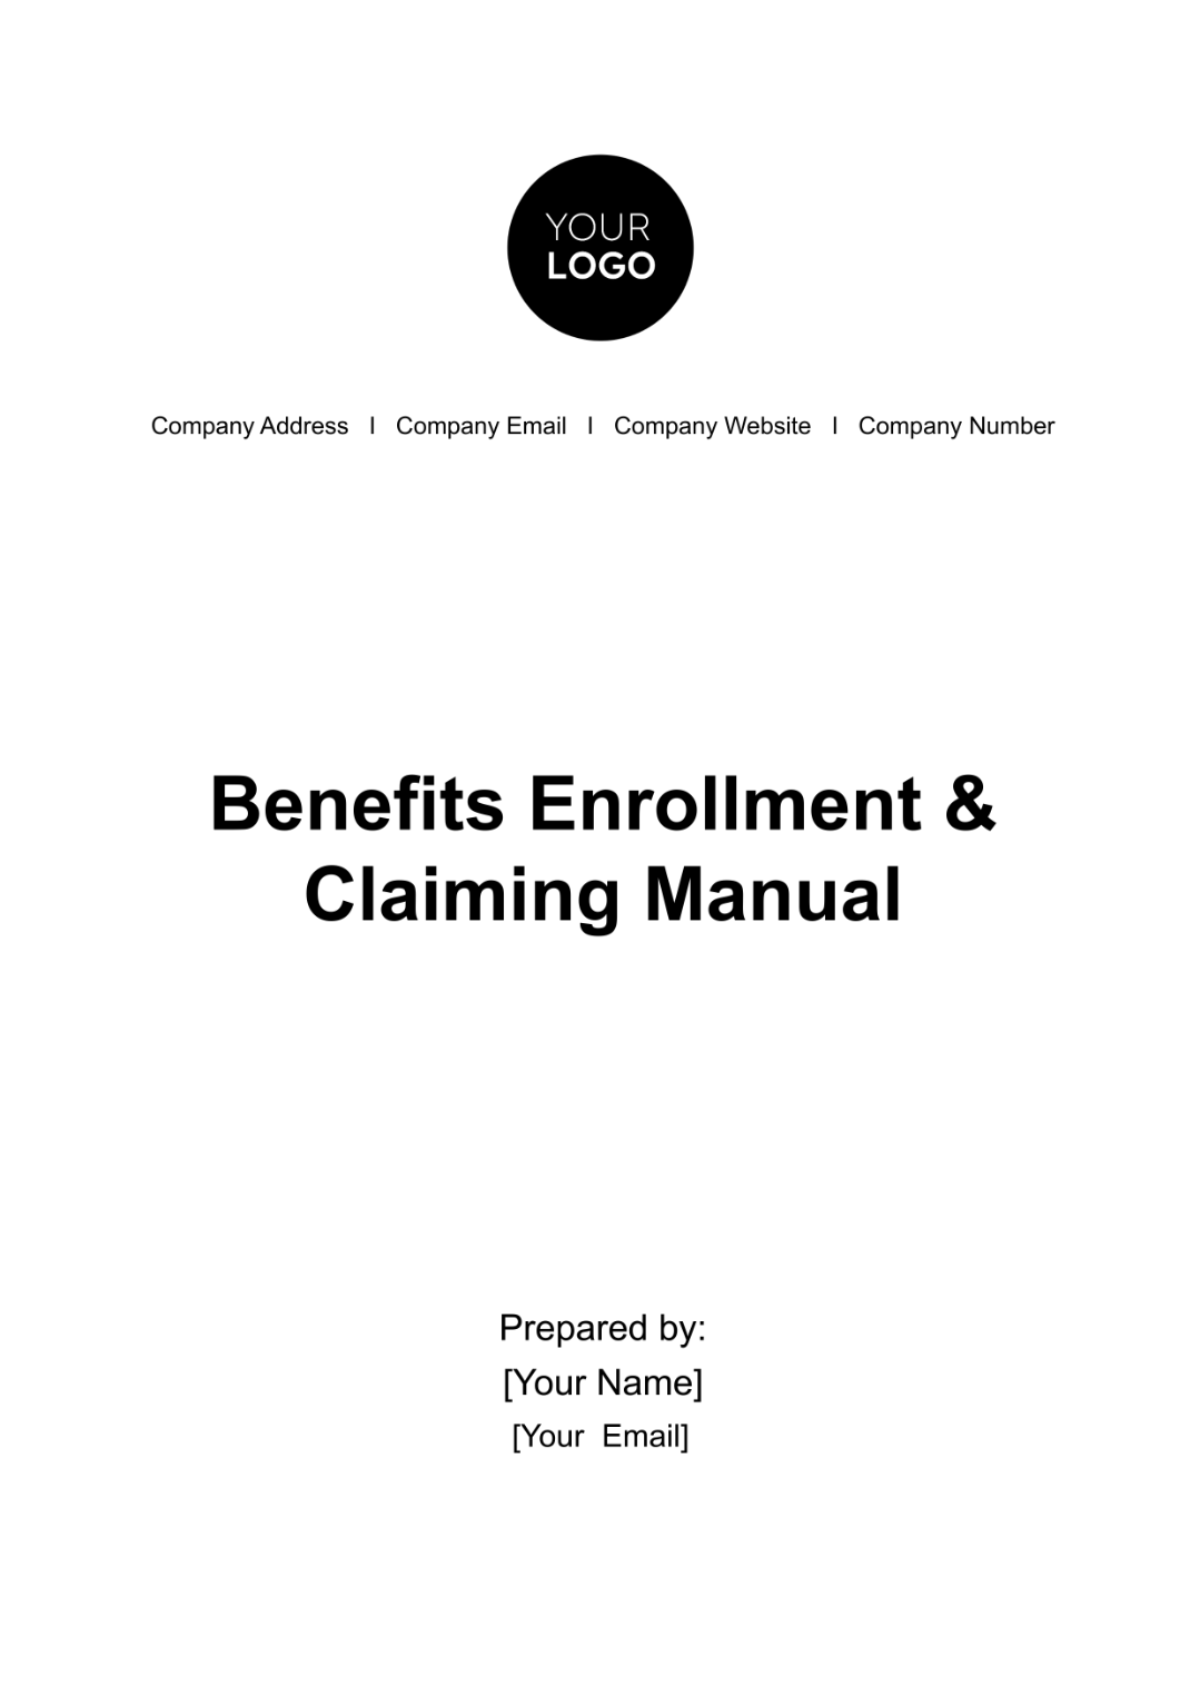 Free Benefits Enrollment and Claiming Manual HR Template